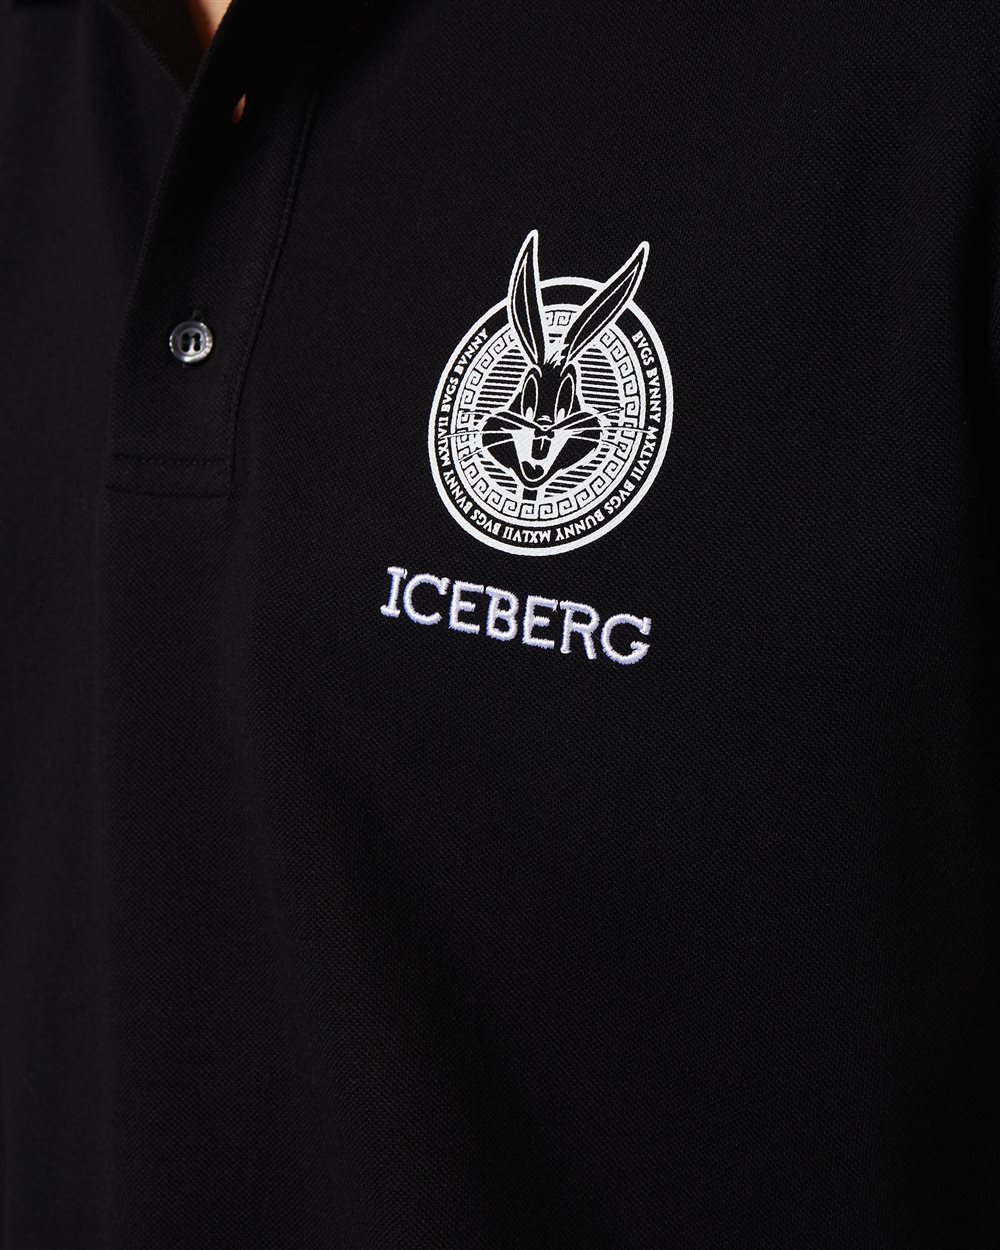 Polo shirt with cartoon graphics and logo - Iceberg - Official Website